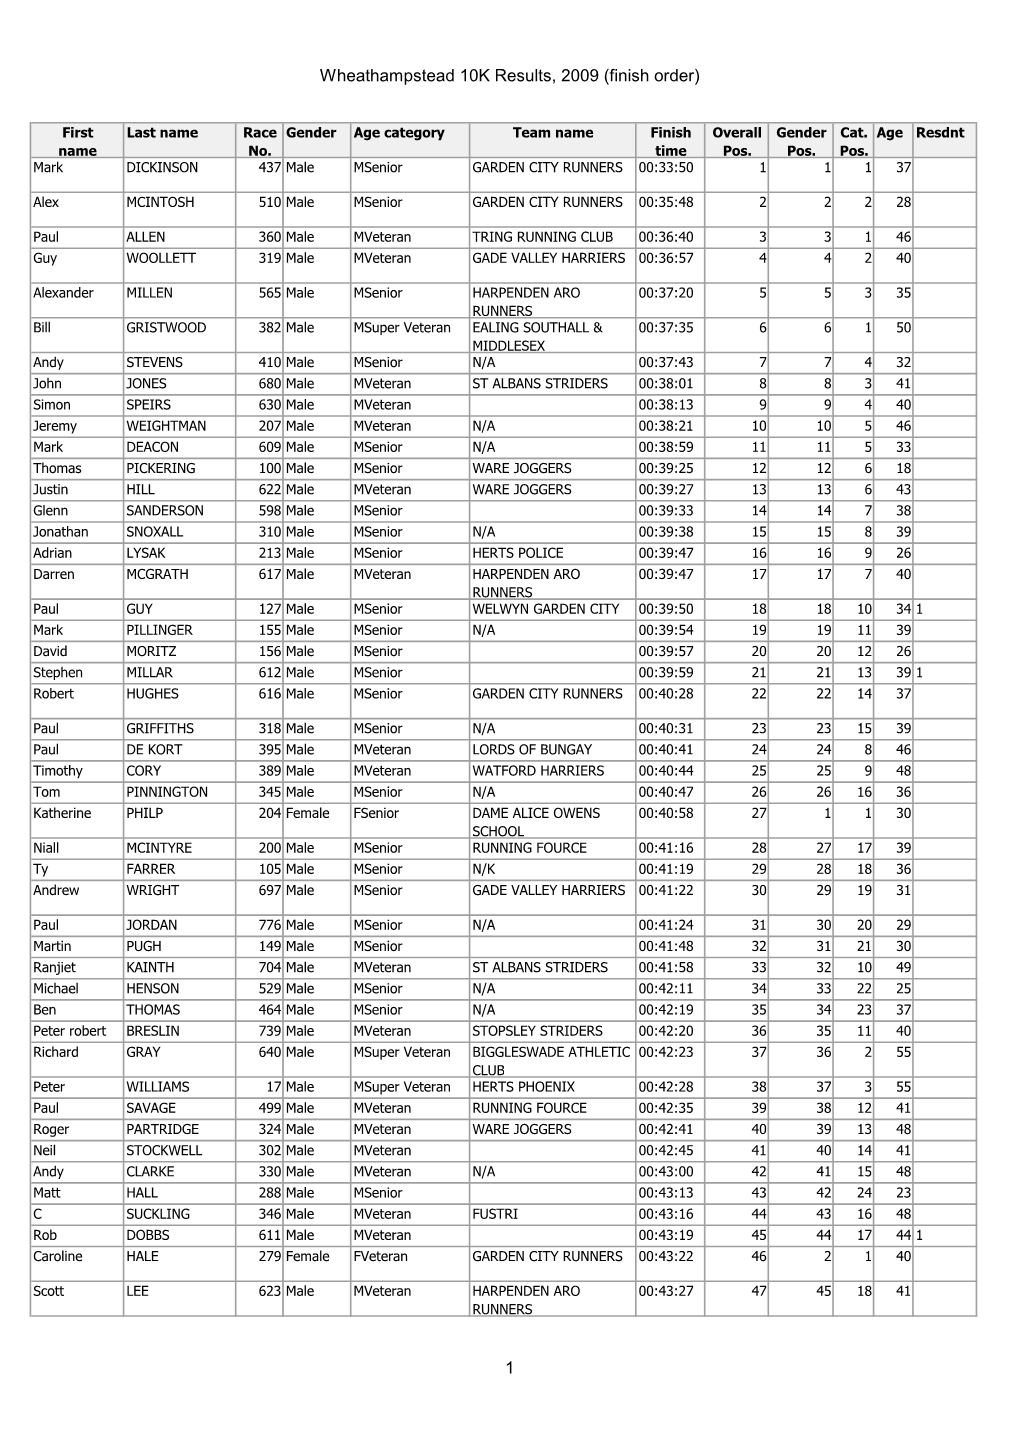 Wheathampstead 10K Results, 2009 (Finish Order)